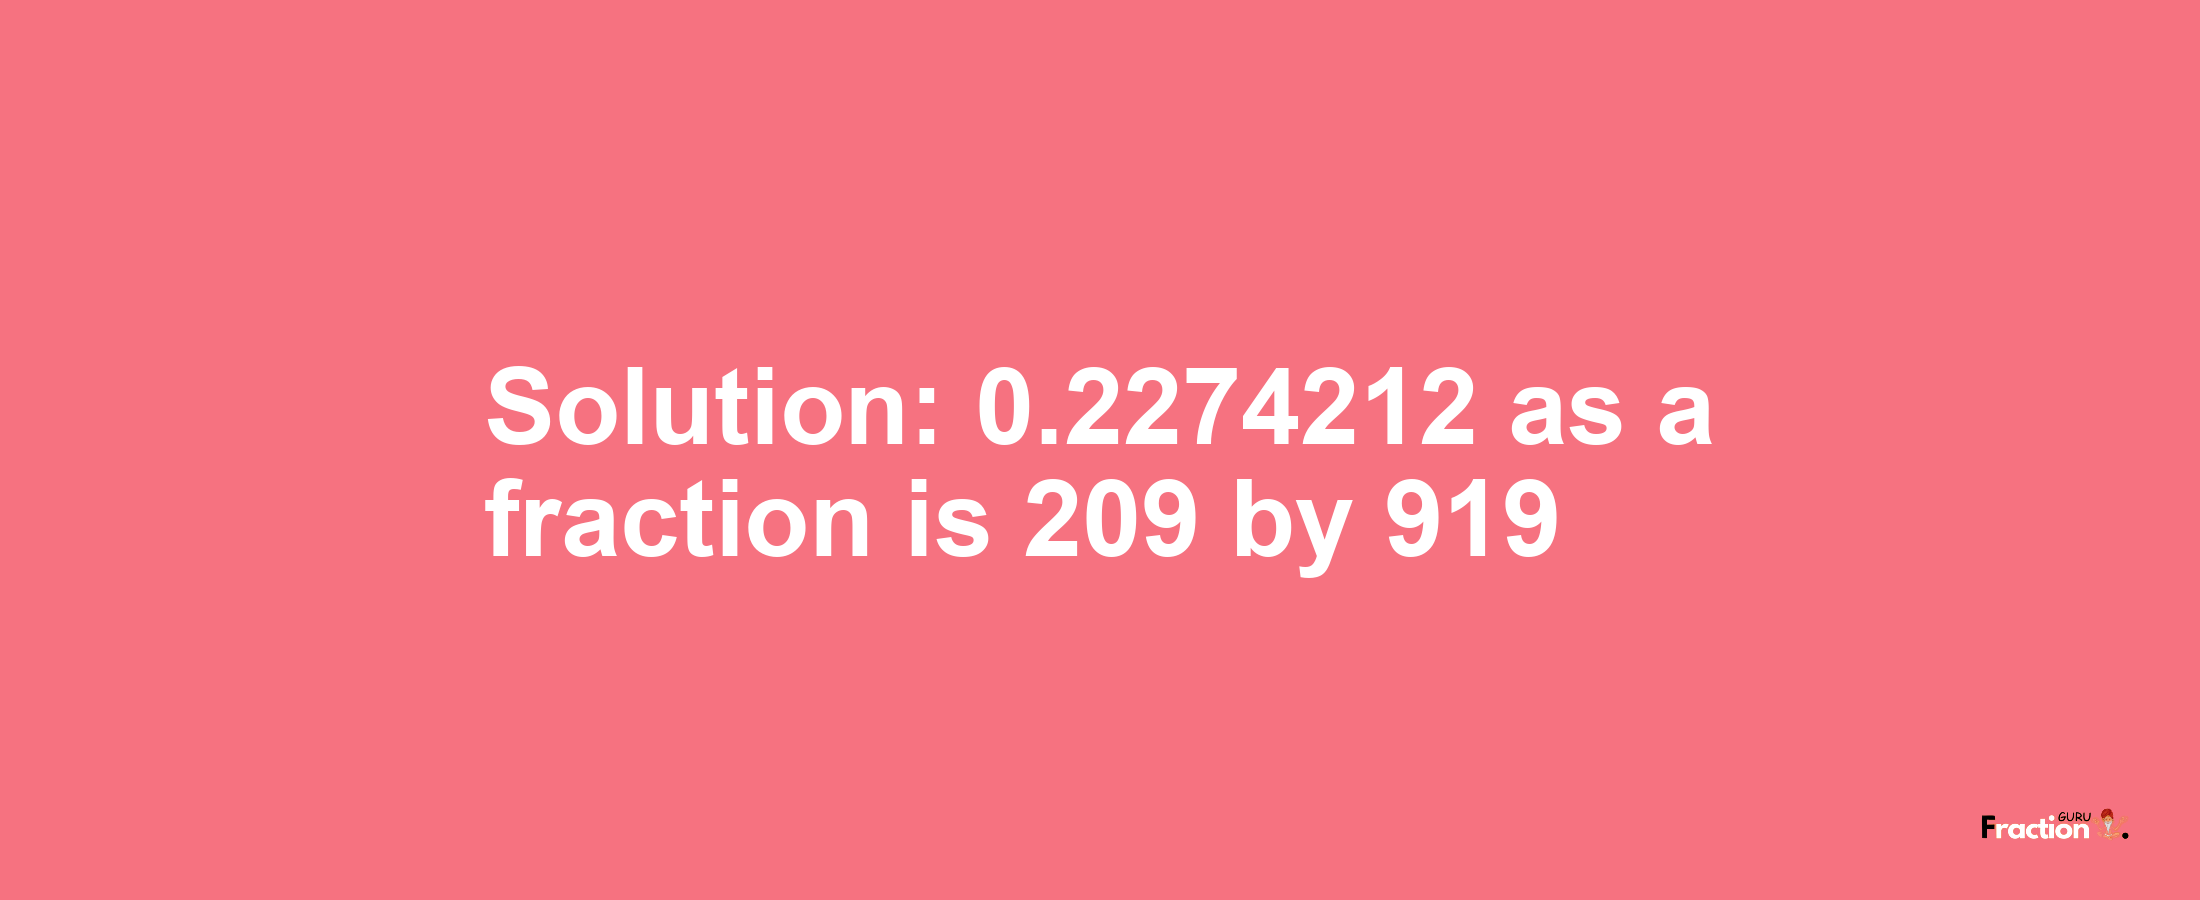 Solution:0.2274212 as a fraction is 209/919